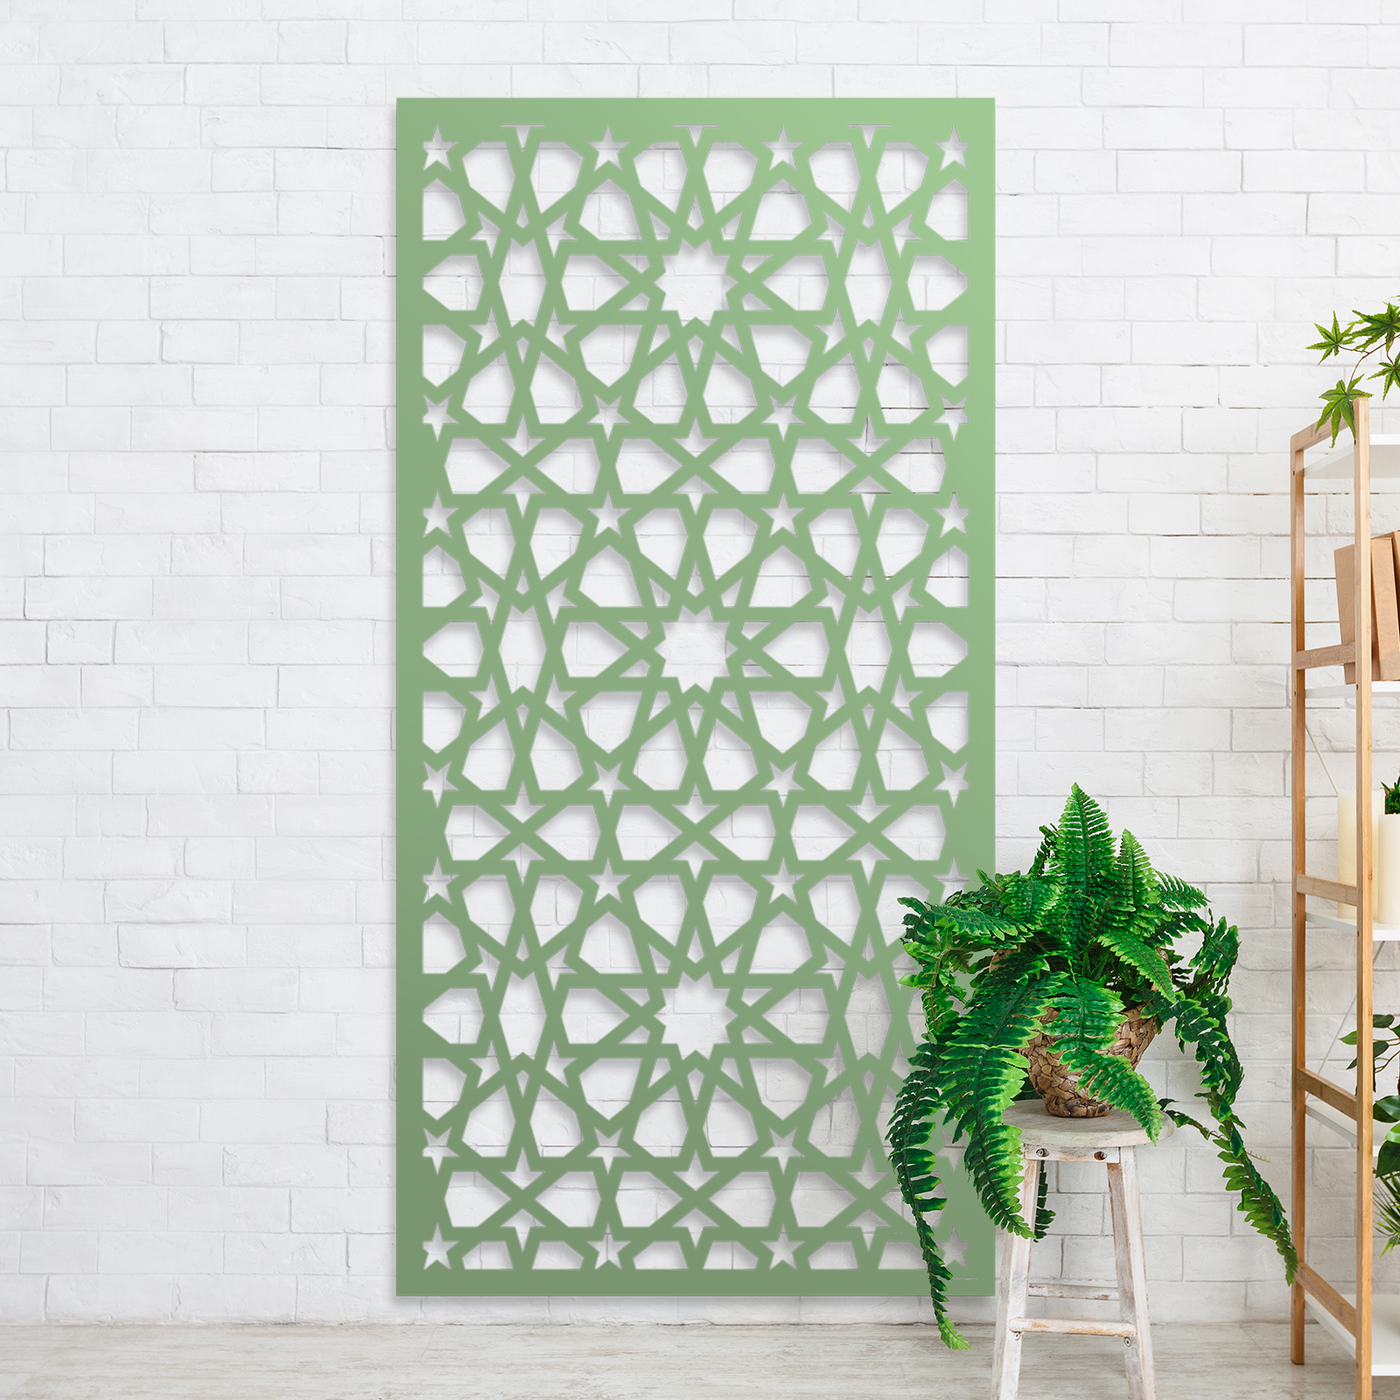 Brame Metal Garden Screen: Get the Privacy You Need